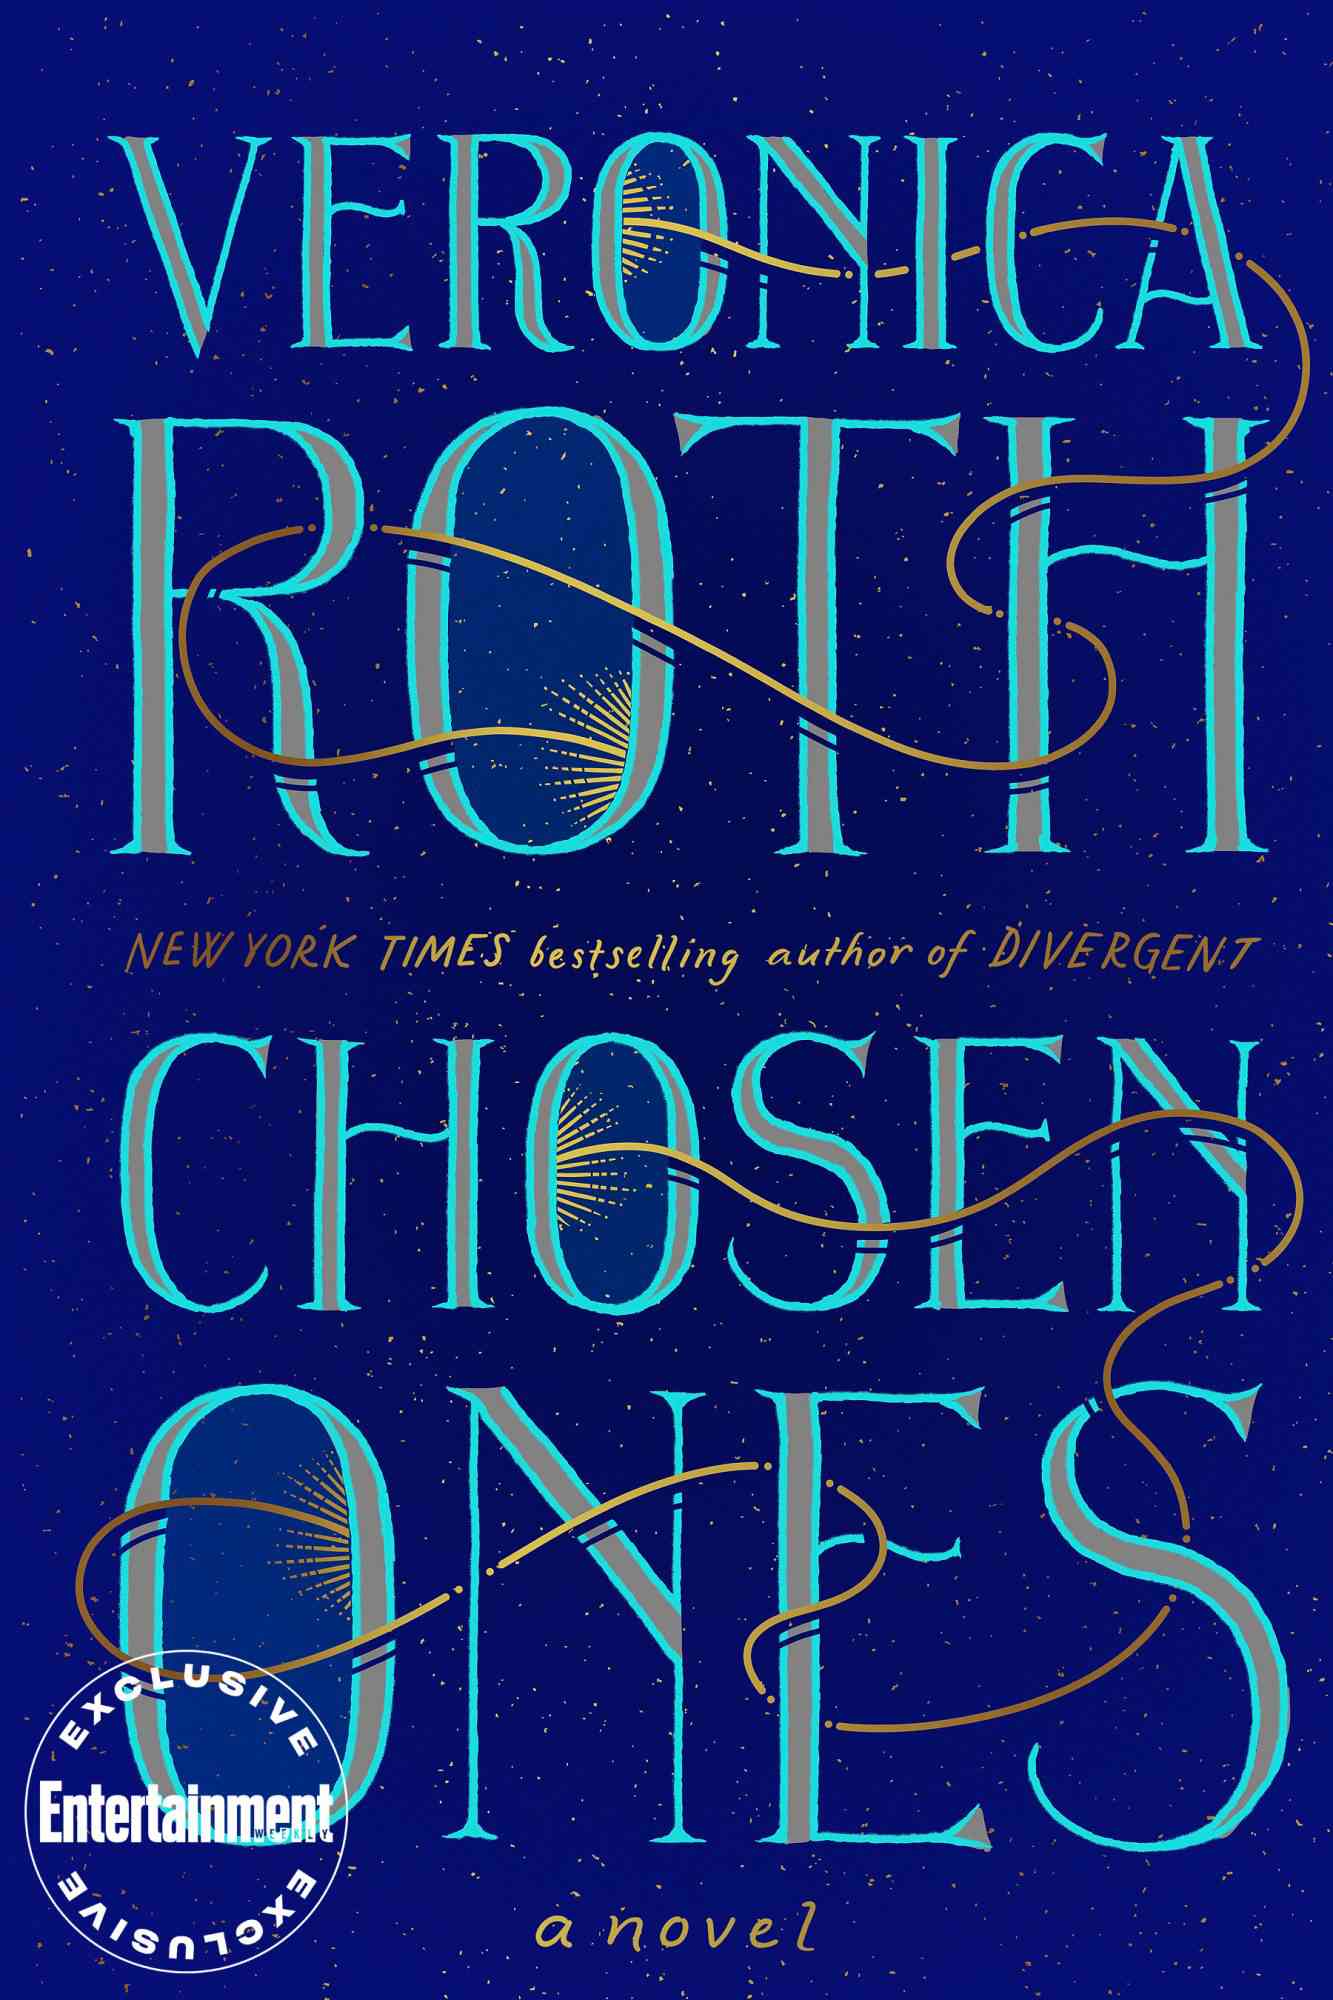 Chosen Ones by Veronica Roth